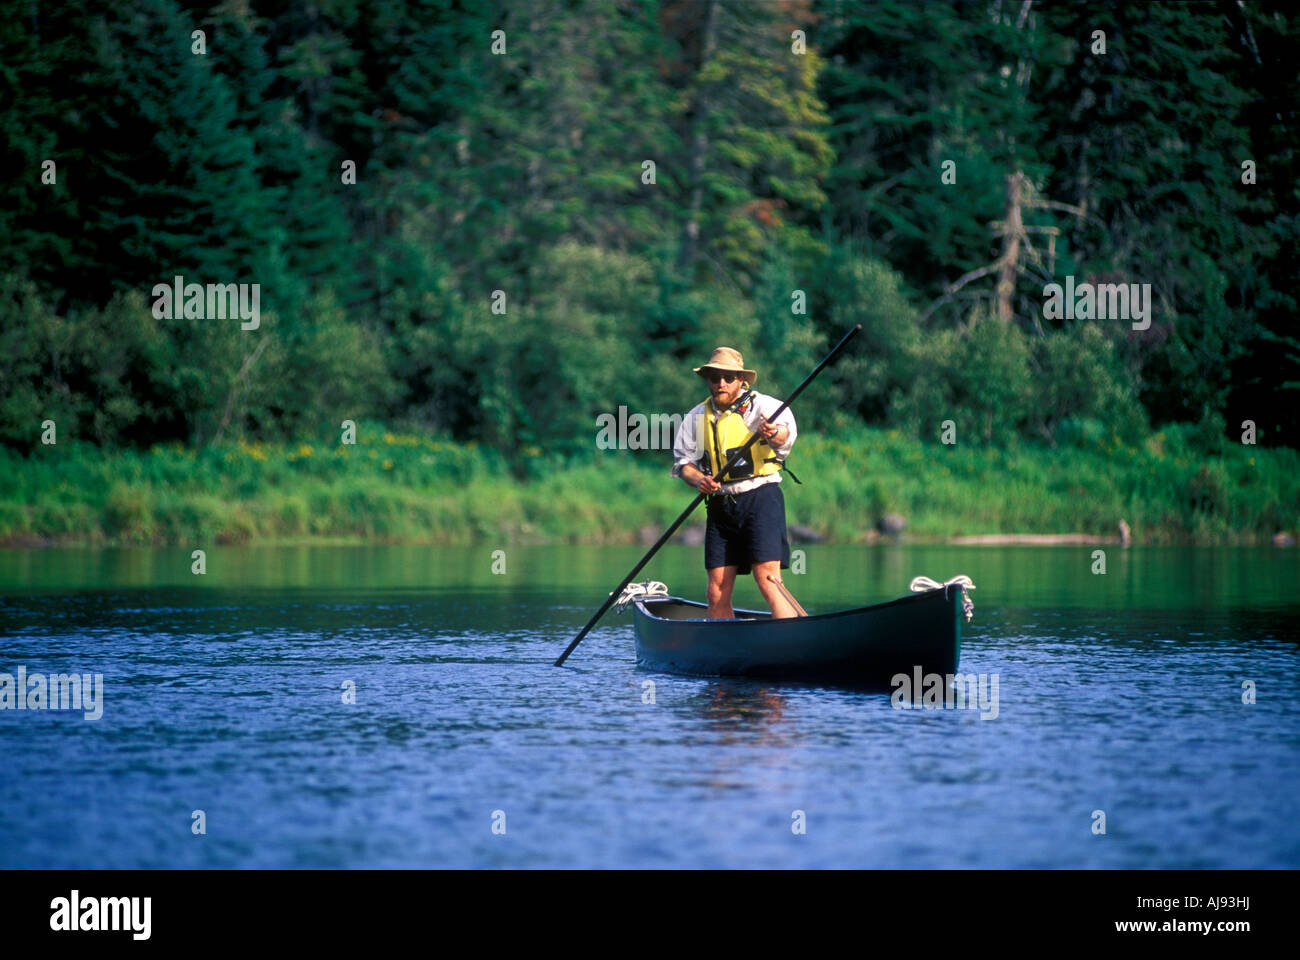 Man displays the art of poling a canoe. Stock Photo